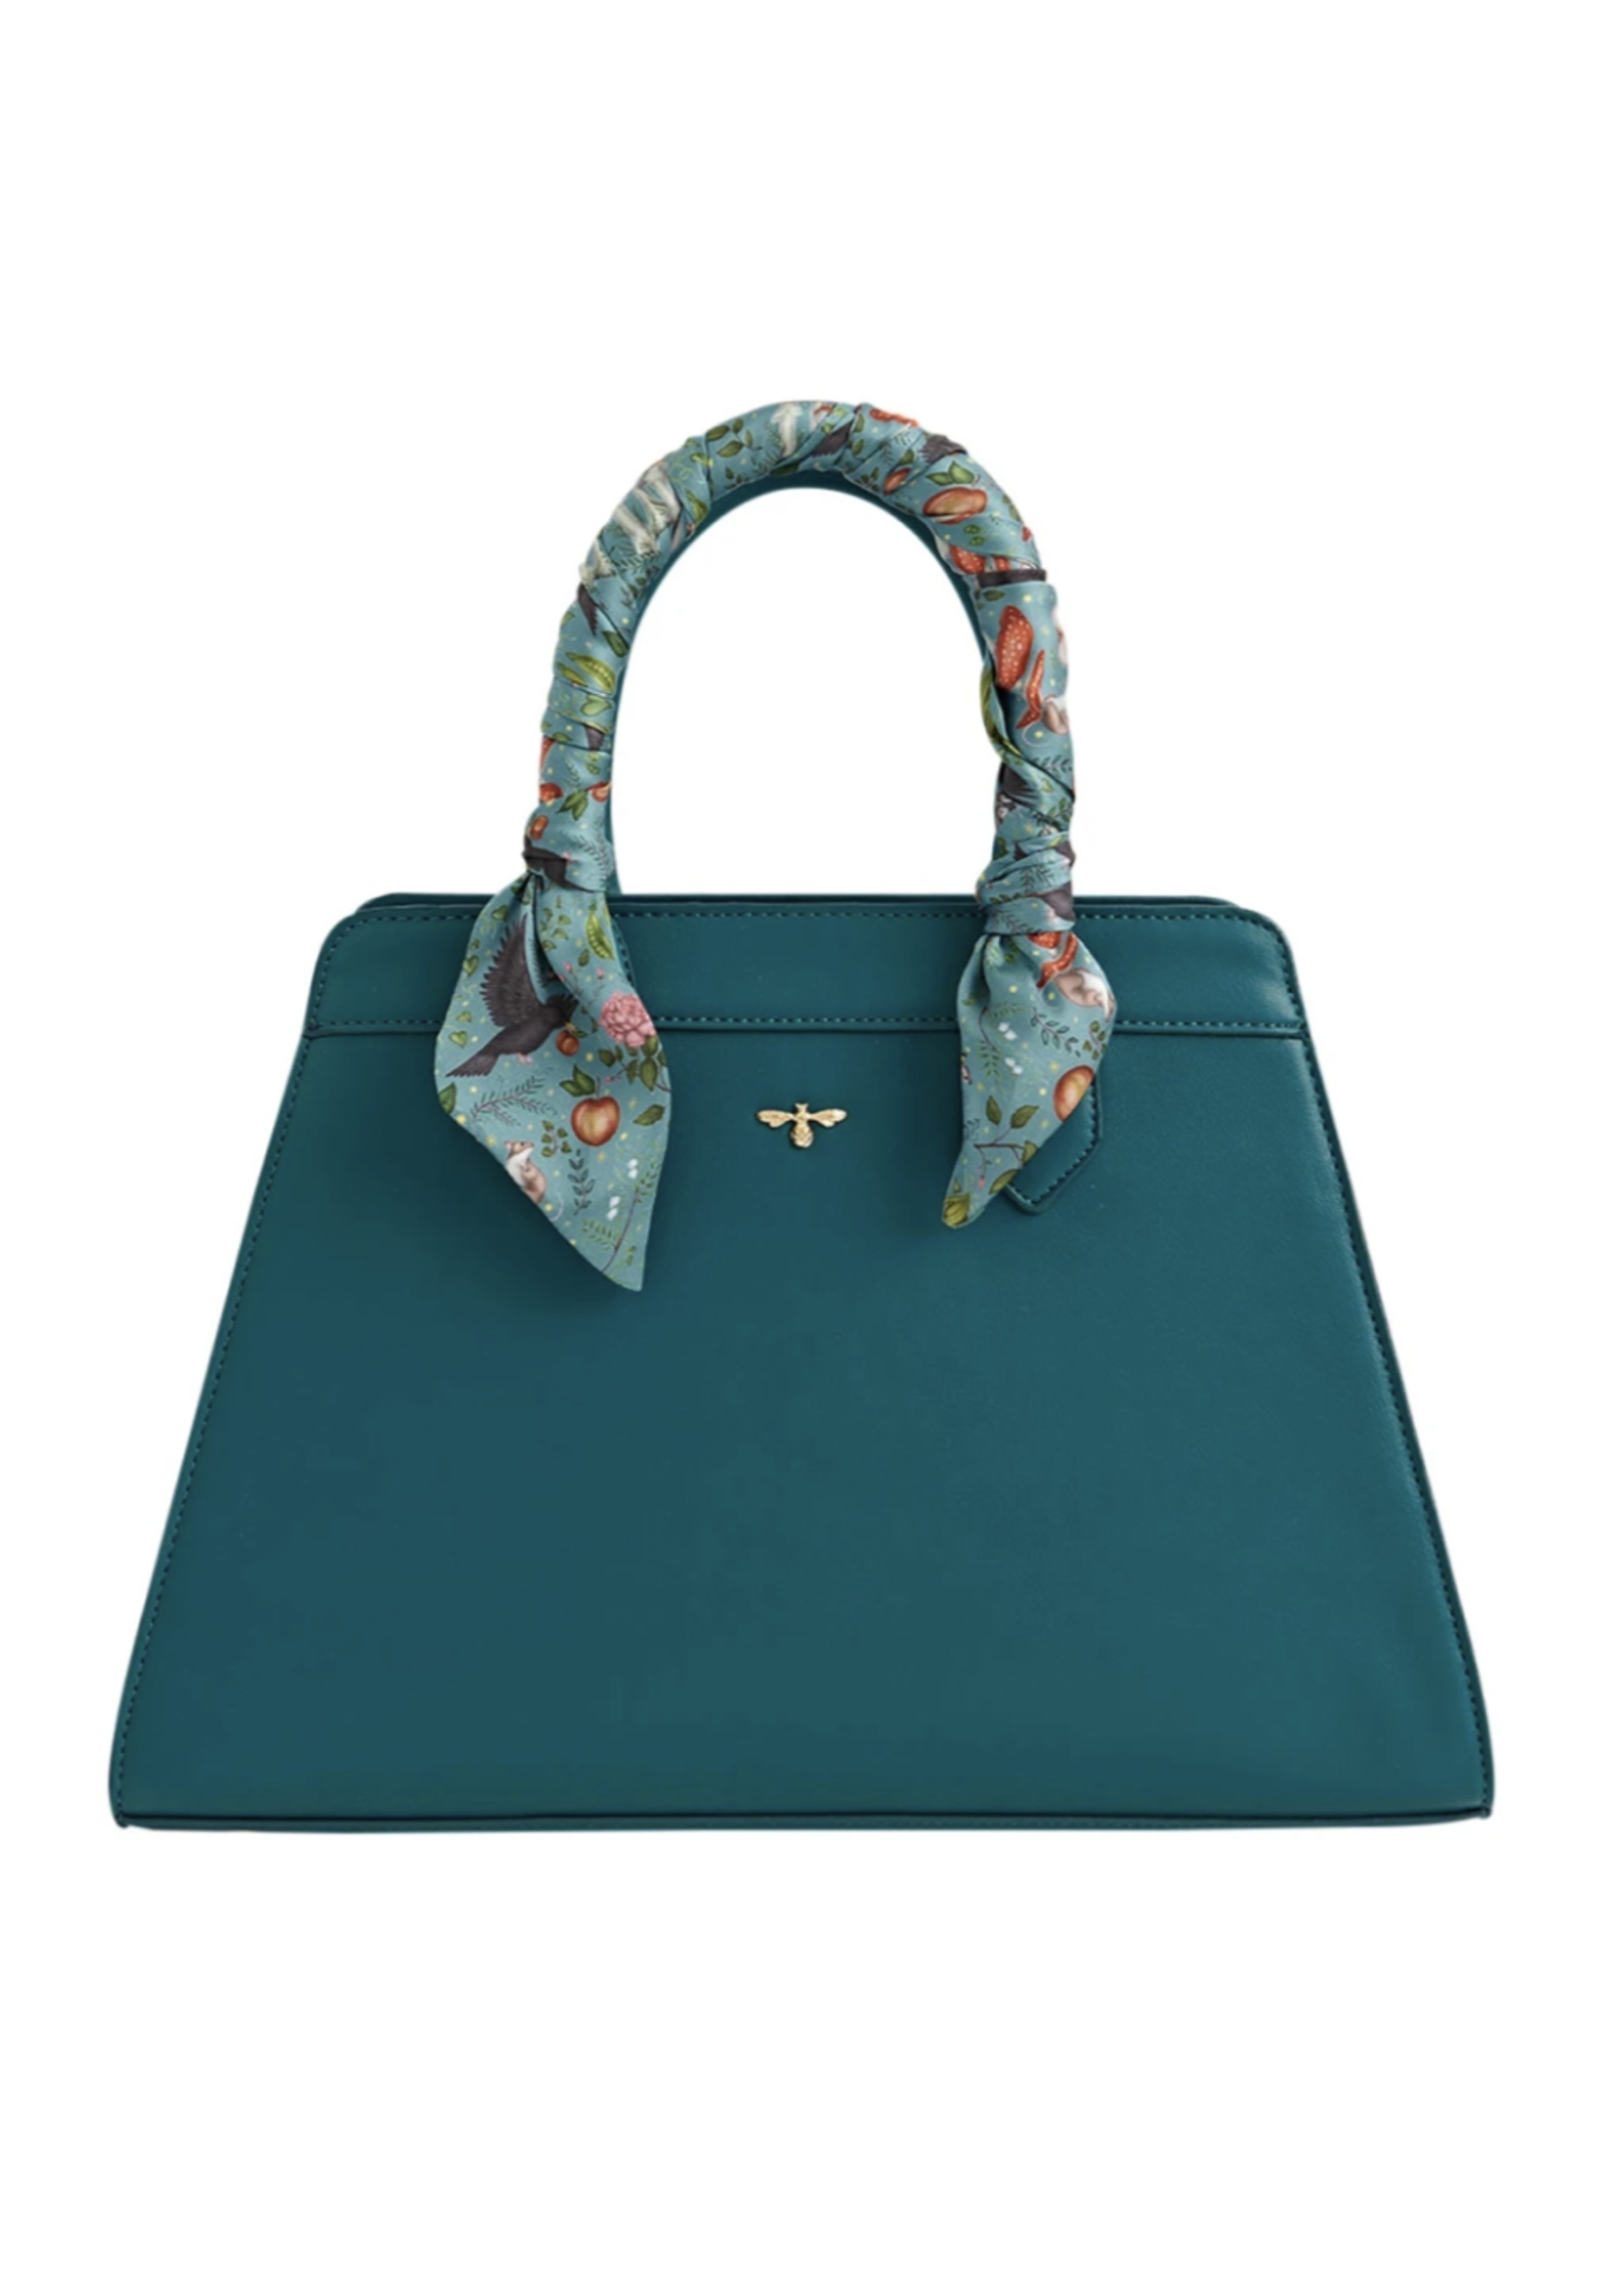 Fable England Fable Into the Woods Tote - Teal - Catherine Rowe limited edition